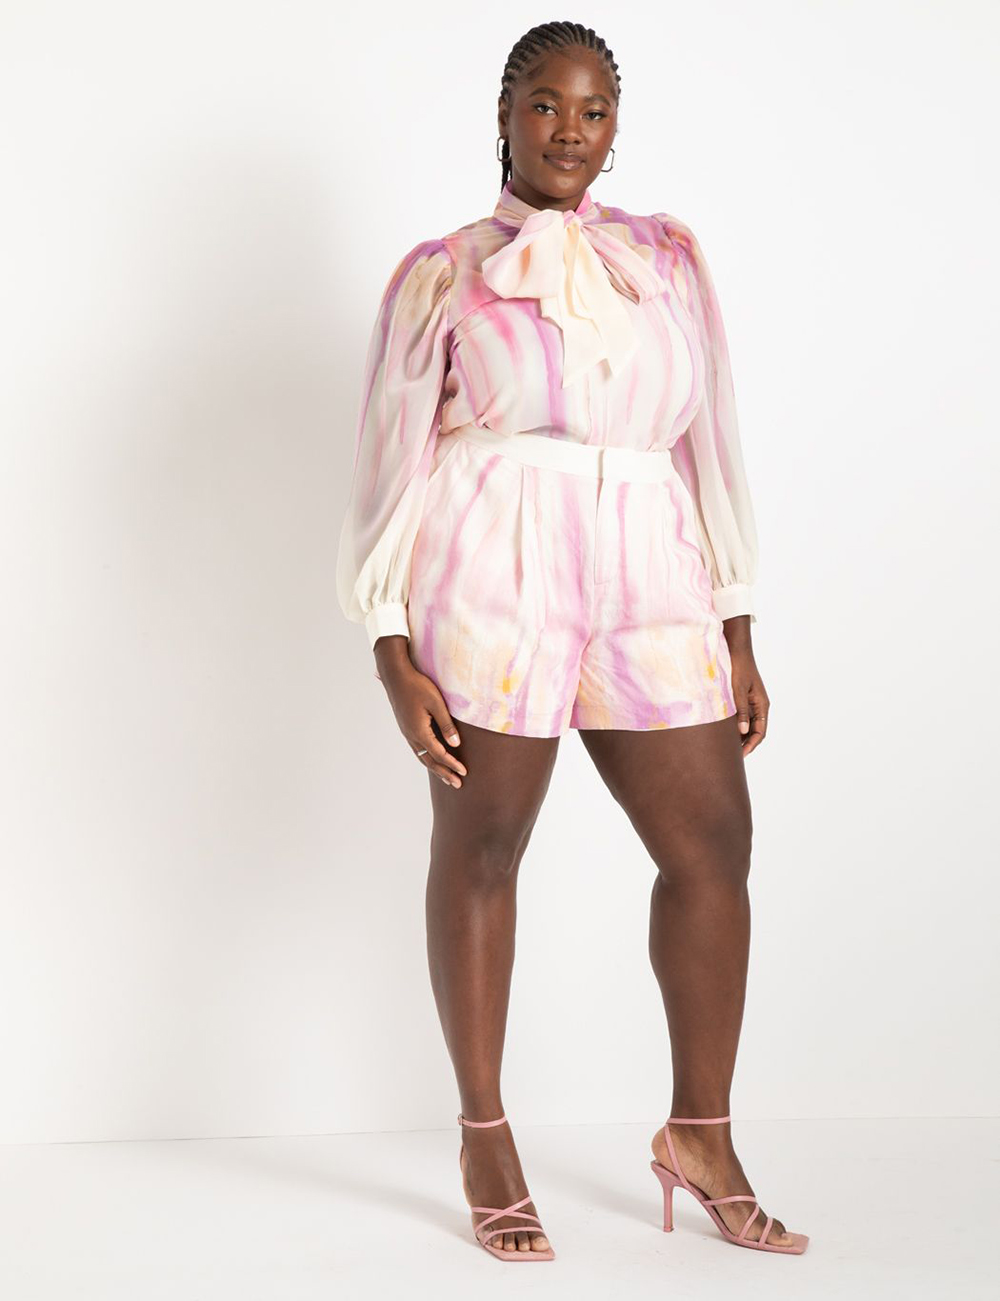 A model wearing tie-dye pink and cream shorts from Eloquii.